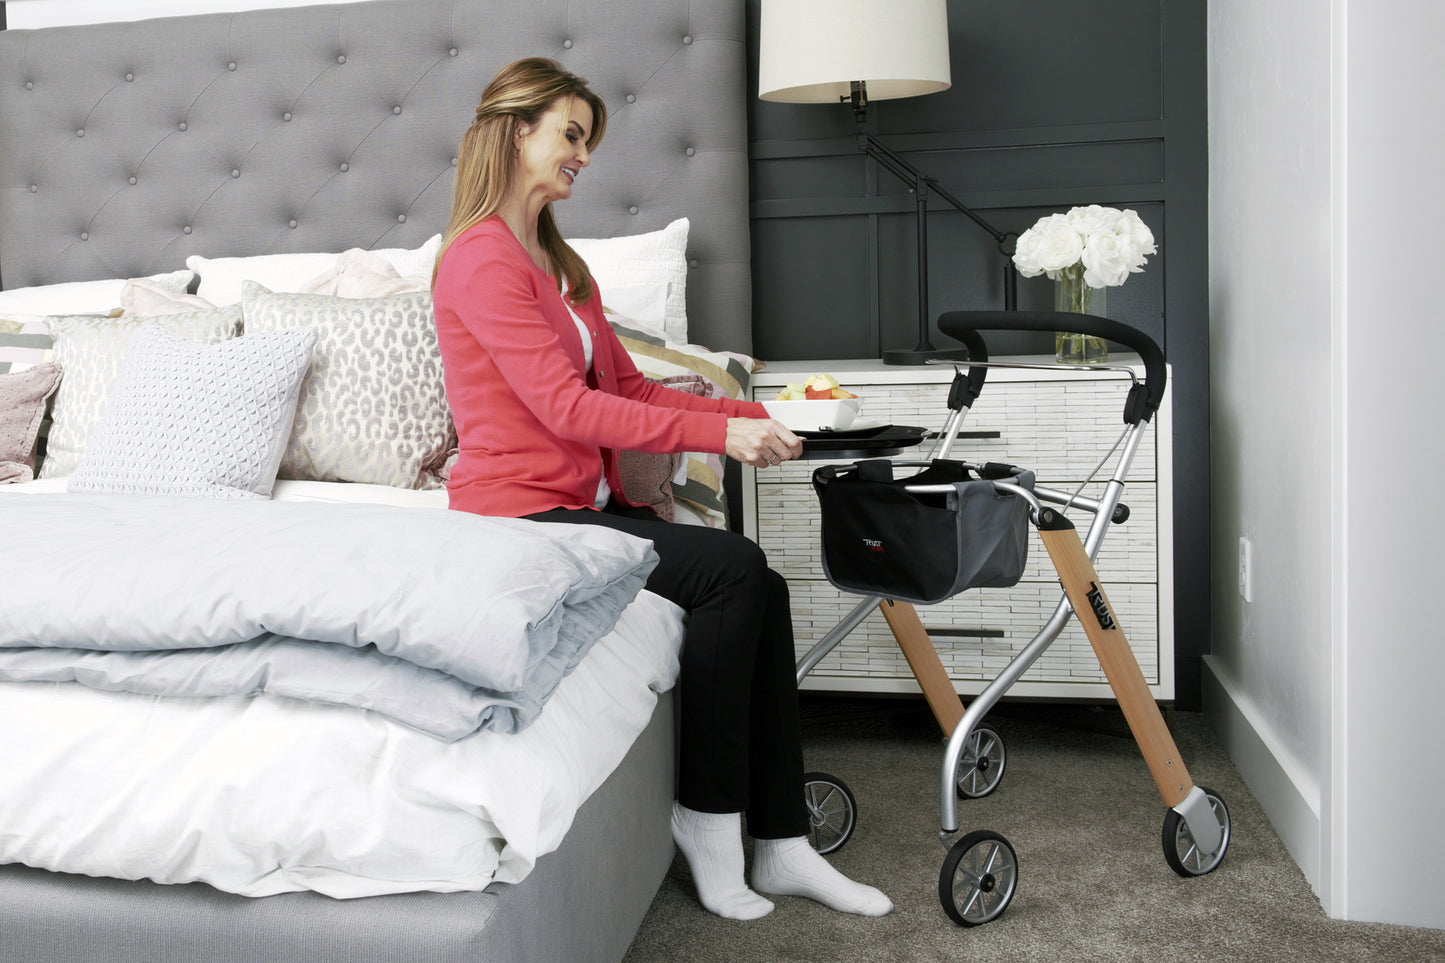 Let’s Go Indoor Rollator by Trust Care